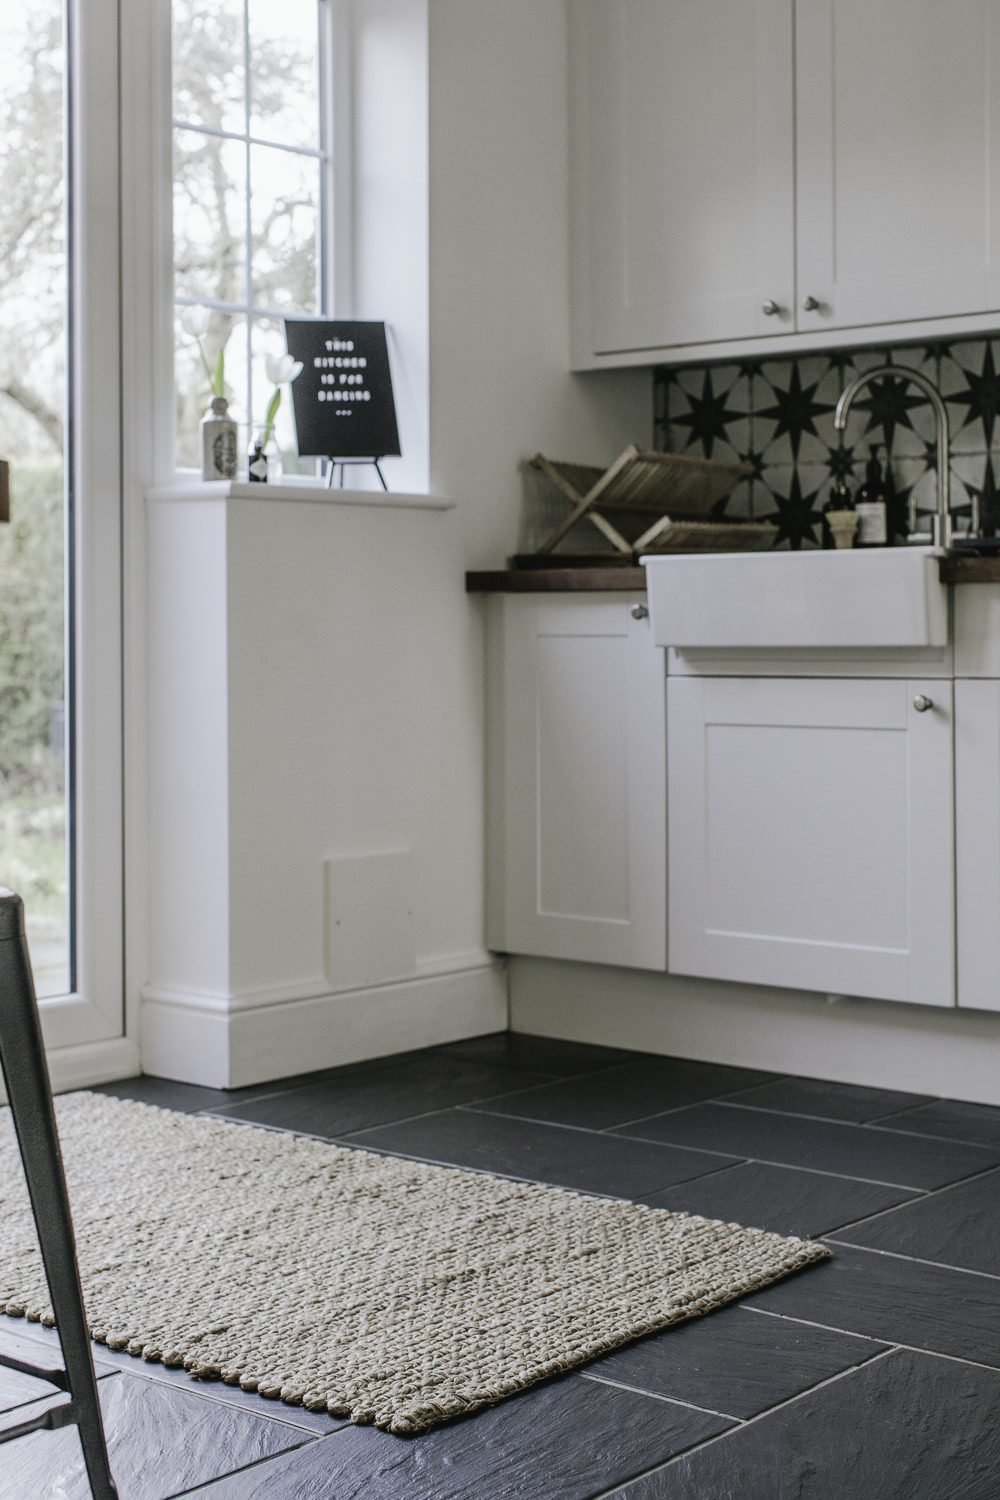 How To Paint Kitchen Cupboards Rock My Style Uk Daily